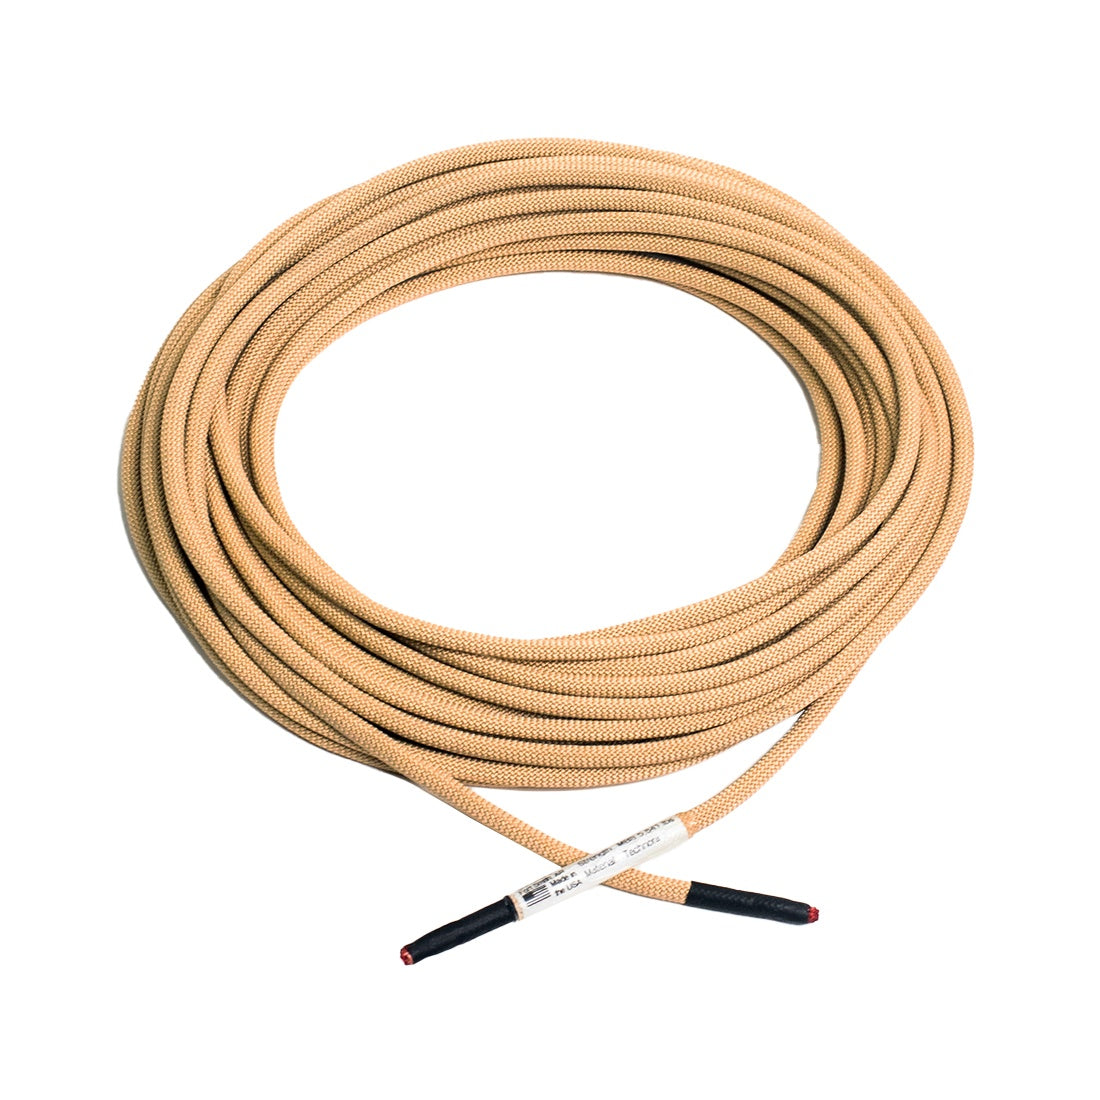 Sky Genie Technora Rope 7.5 mm - 50 Foot - Front View